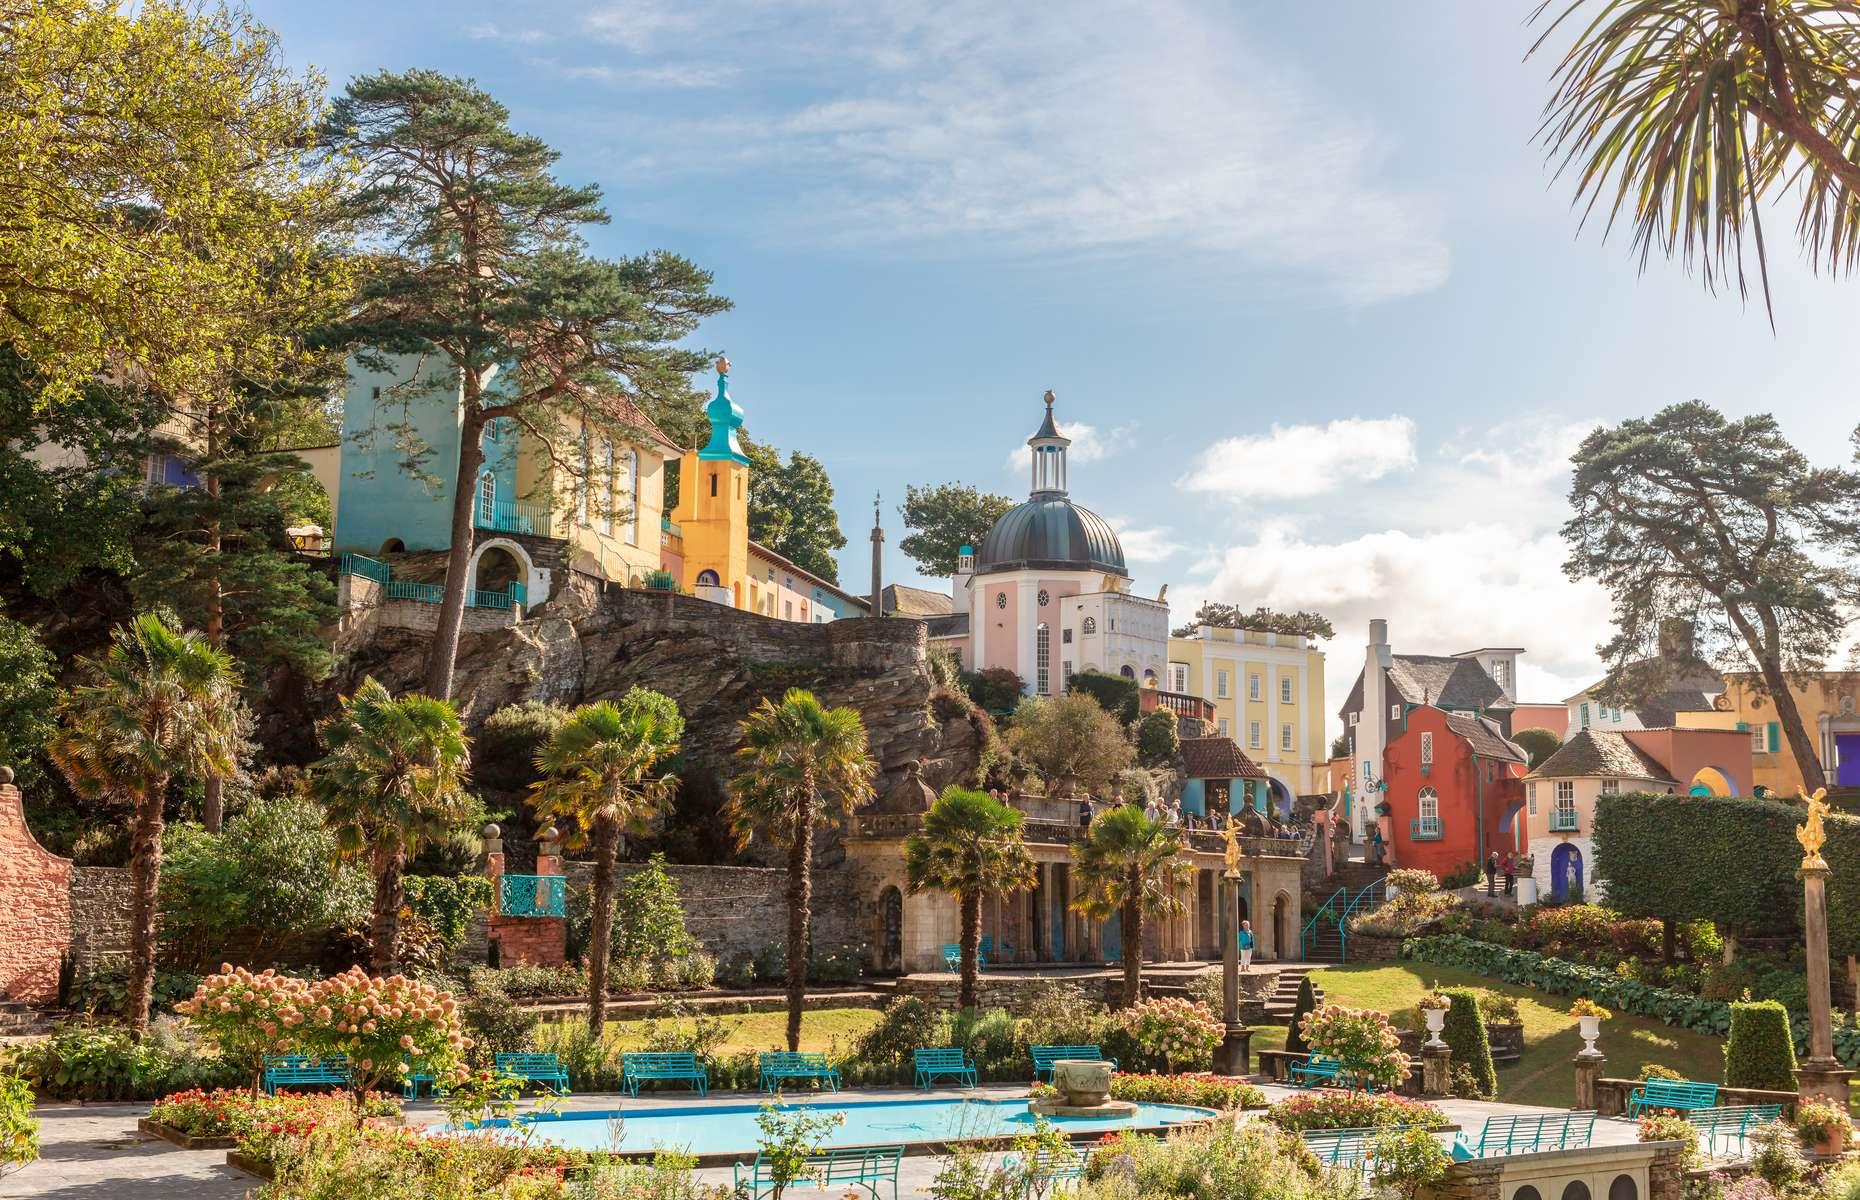 <p>Lying on the coast of North Wales, the fairy tale village of <a href="https://www.loveexploring.com/news/68574/portmeirion-village-wales">Portmeirion</a> feels a world away from the rest of the UK. Built between 1925 and 1975 by Welsh architect Sir Clough Williams-Ellis, Portmeirion was inspired by a vibrant Italian village. Surrounded by picturesque mountains, its dreamy Baroque-inspired domes and pretty buildings have drawn artists, writers and musicians from all over the world, including Beatles singer, George Harrison. </p>  <p><a href="https://www.loveexploring.com/gallerylist/78905/stunning-photos-of-places-you-wont-believe-are-in-the-uk"><strong>Check out more stunning photos of places you won’t believe are in the UK</strong></a></p>